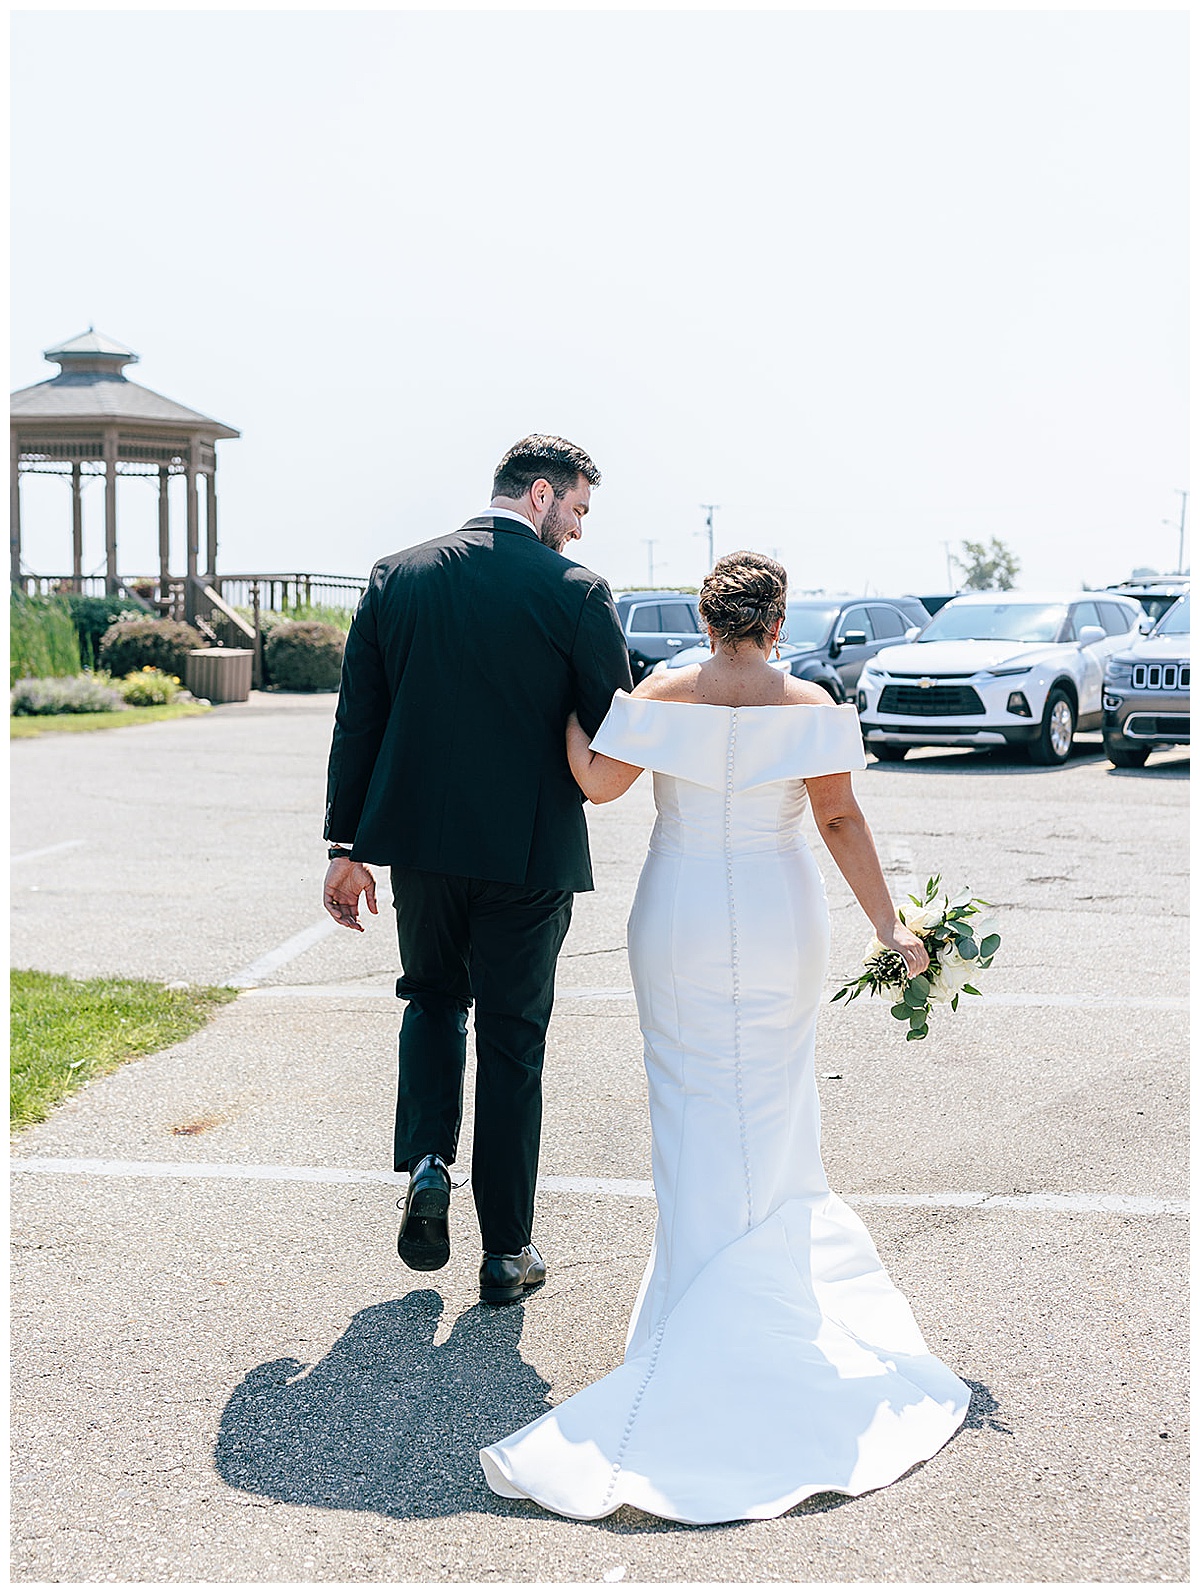 Husband and wife walk together for Yacht Charter Wedding 